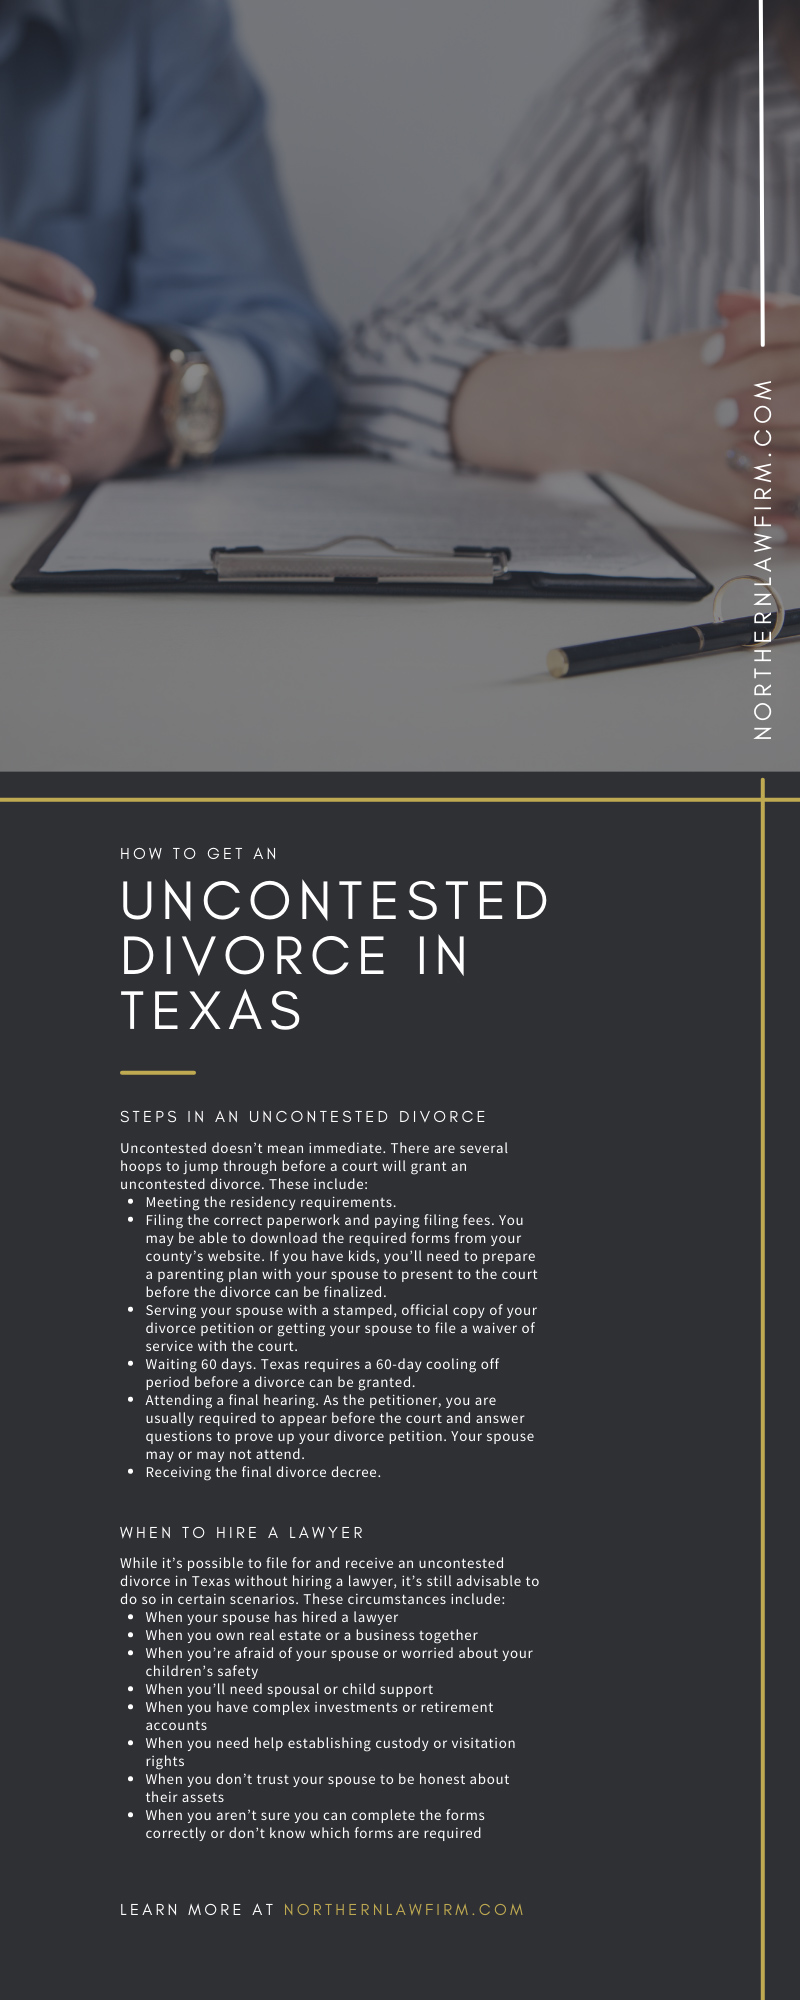 How To Get an Uncontested Divorce in Texas